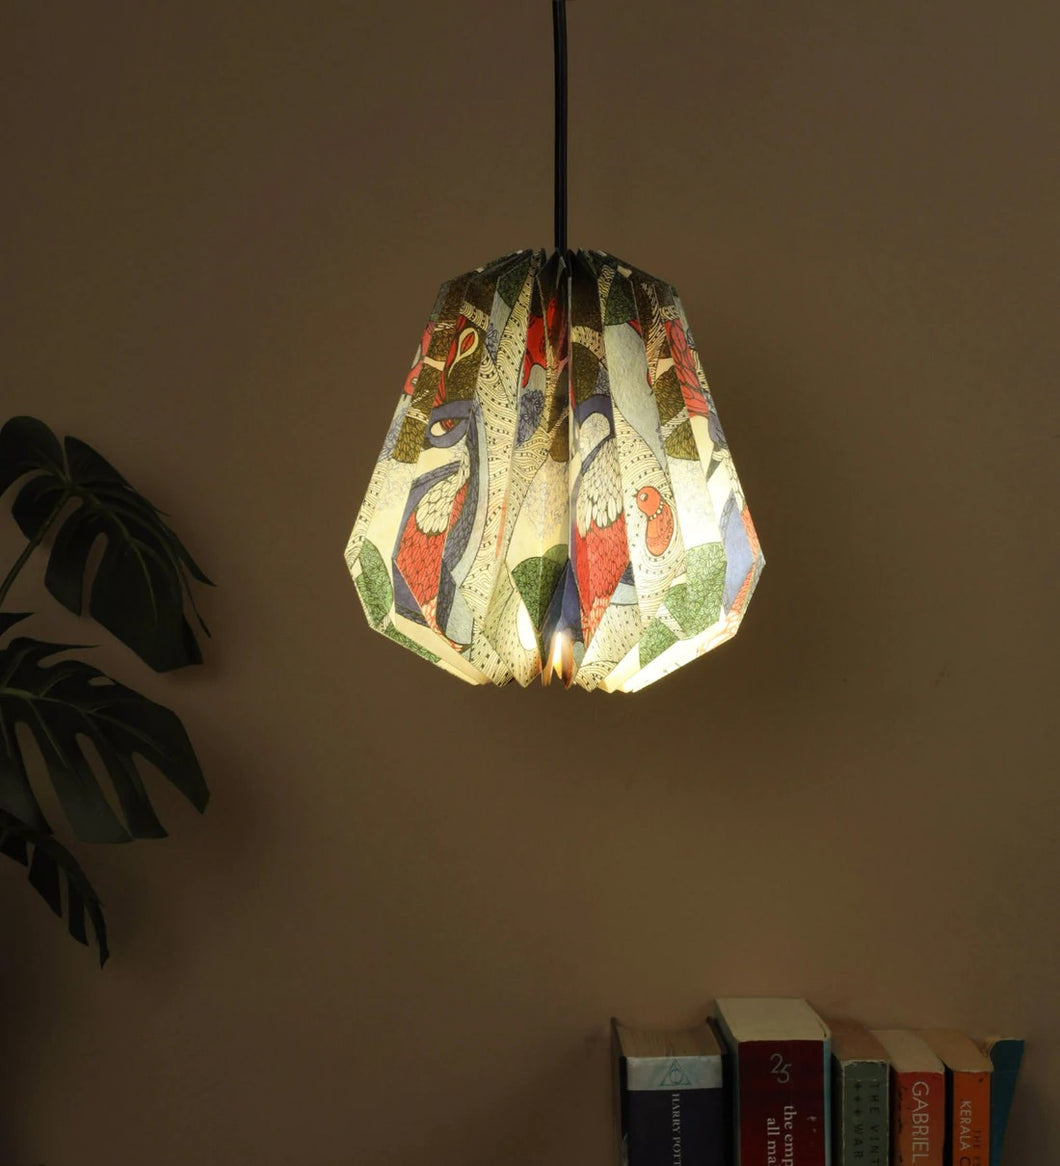 GOND ART COLLAPSIBLE CONICAL ORIGAMI HANGING LAMPSHADE